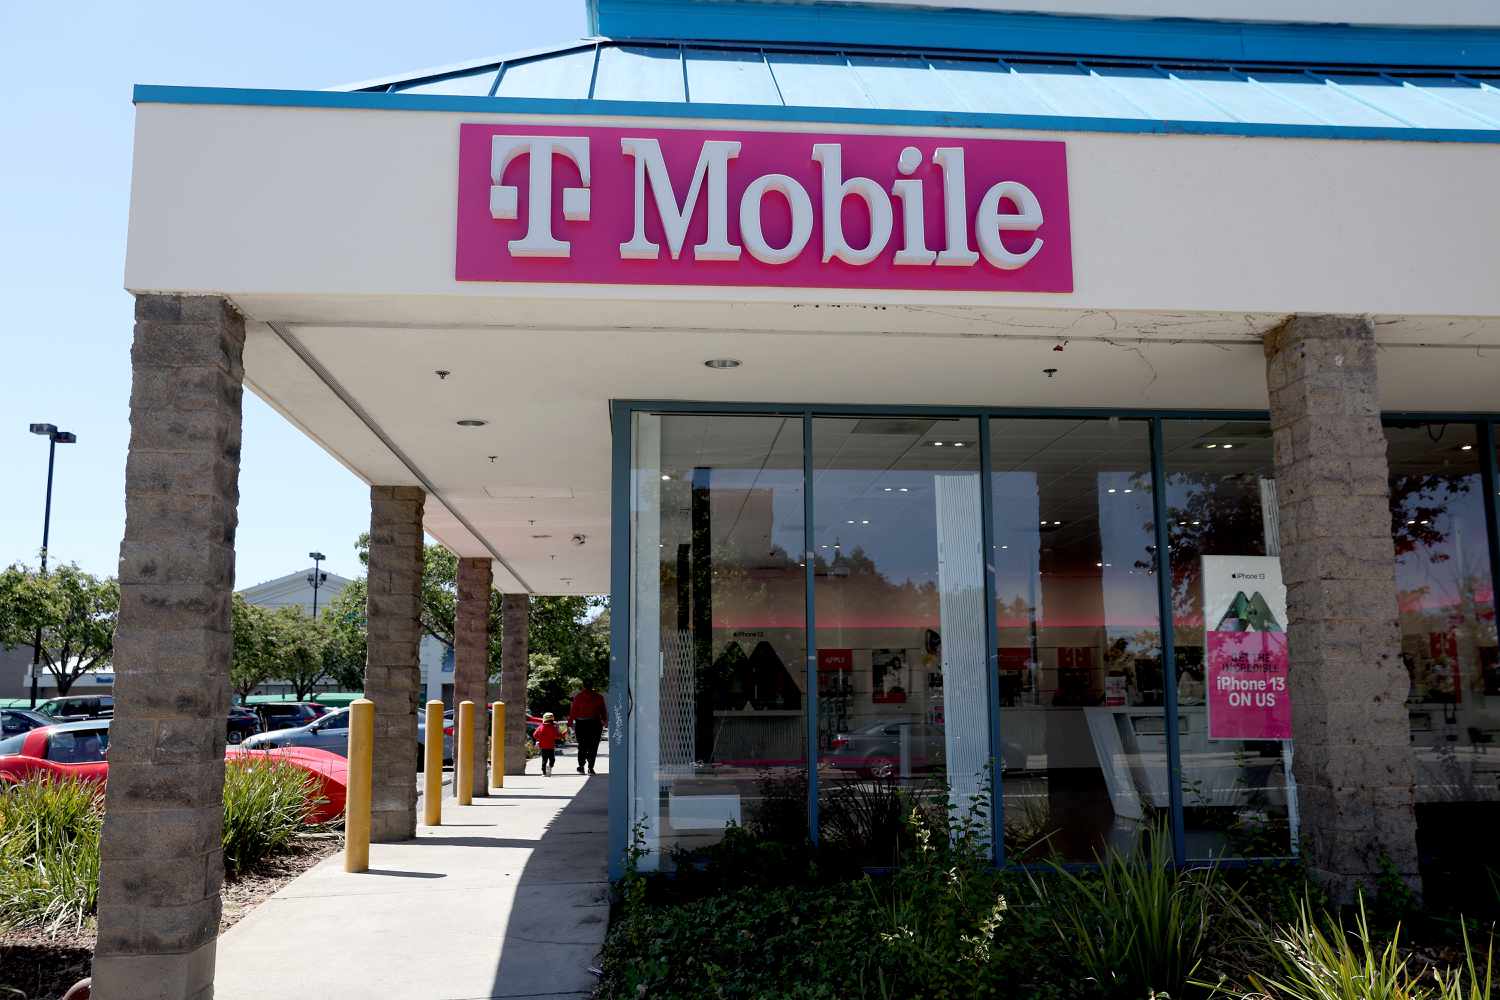 T-Mobile's Bold Move Towards a Future, Mobile Phone Without Apps